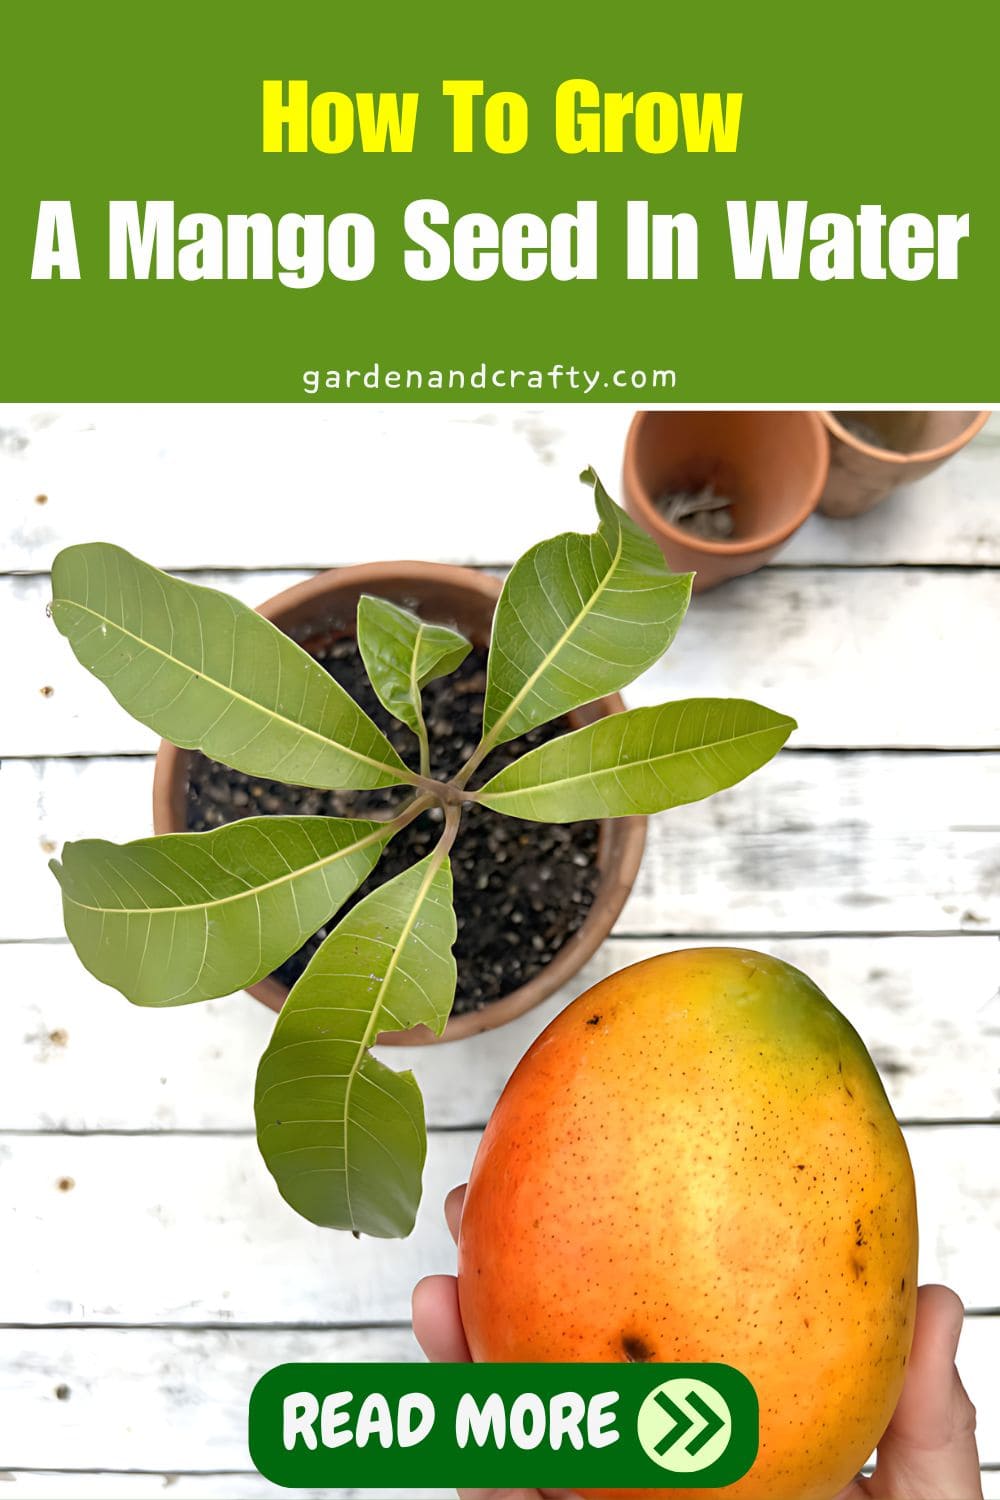 How To Grow A Mango Seed In Water